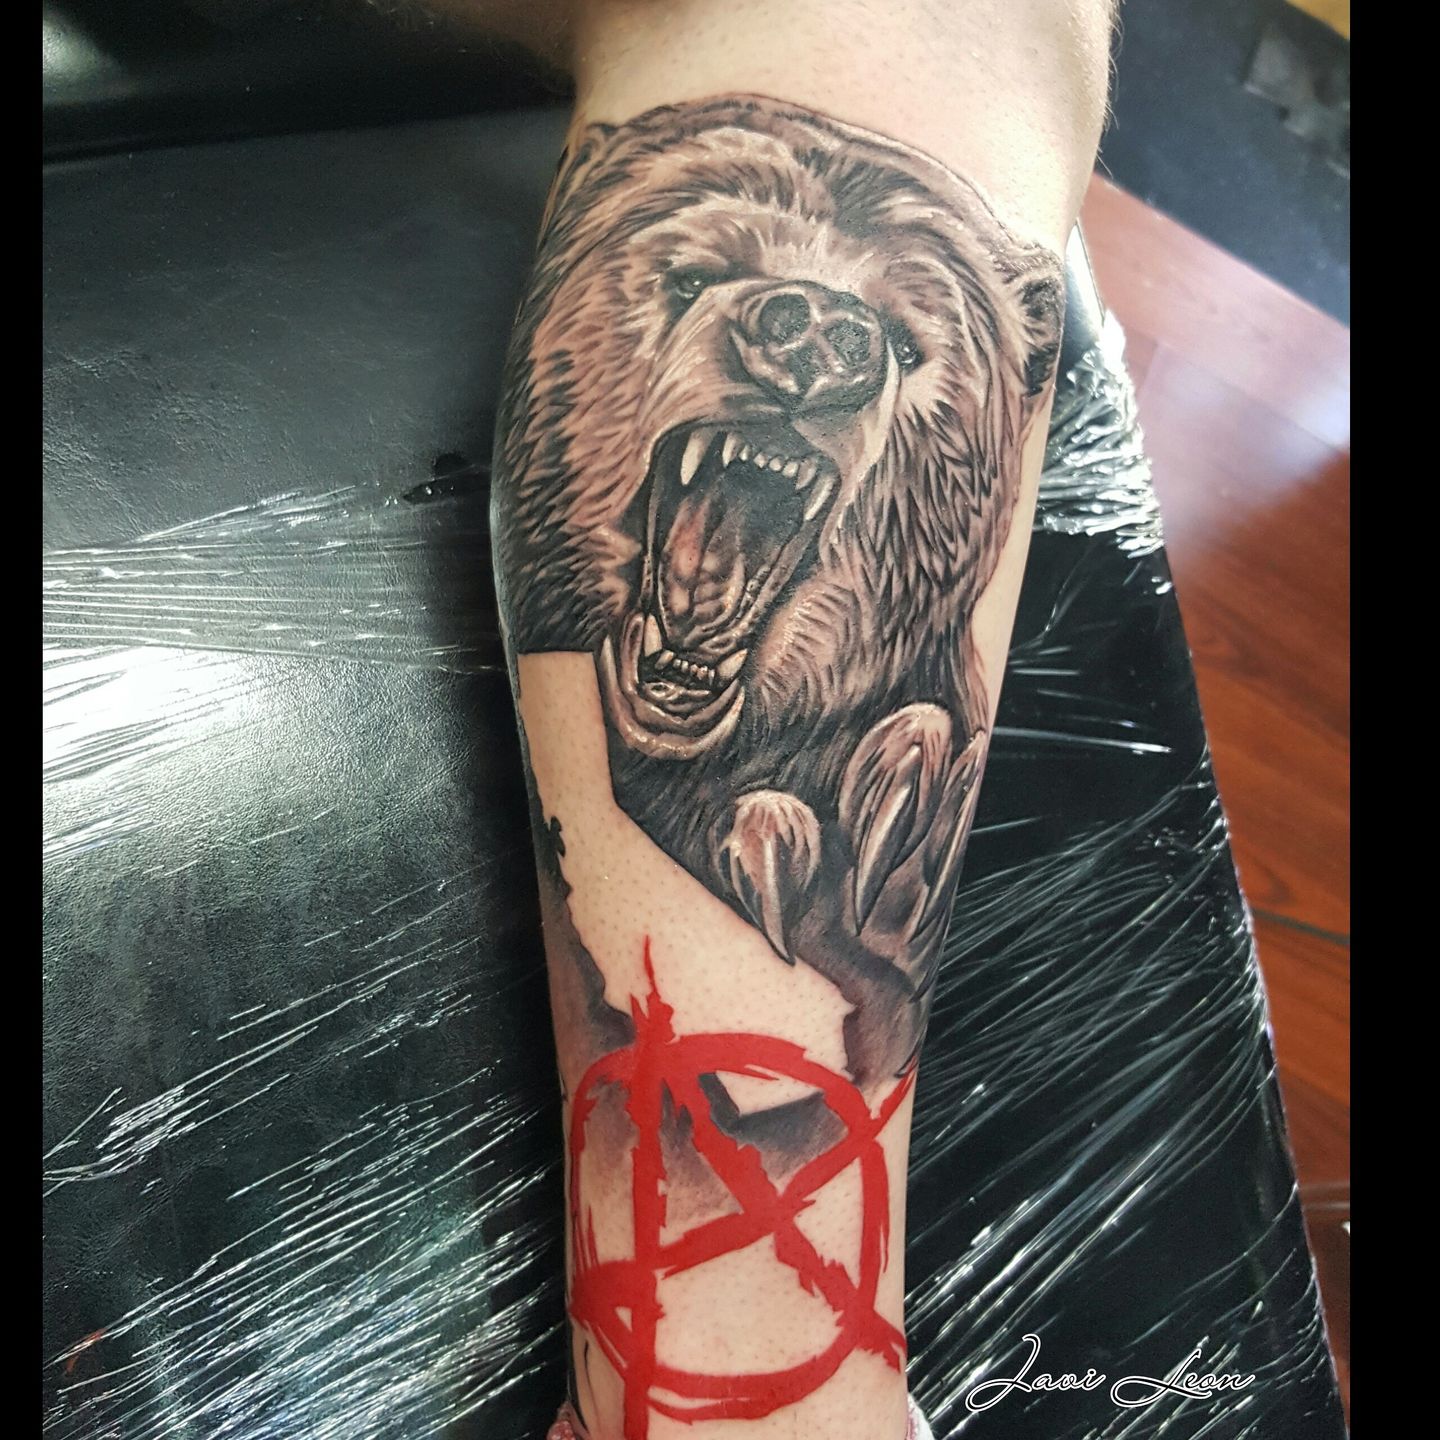 Super fun grizzly bear in the wild 🐻 I can't wait to continue onto this  dope nature sleeve!✨What do y'all think? Lmk in the comm... | Instagram